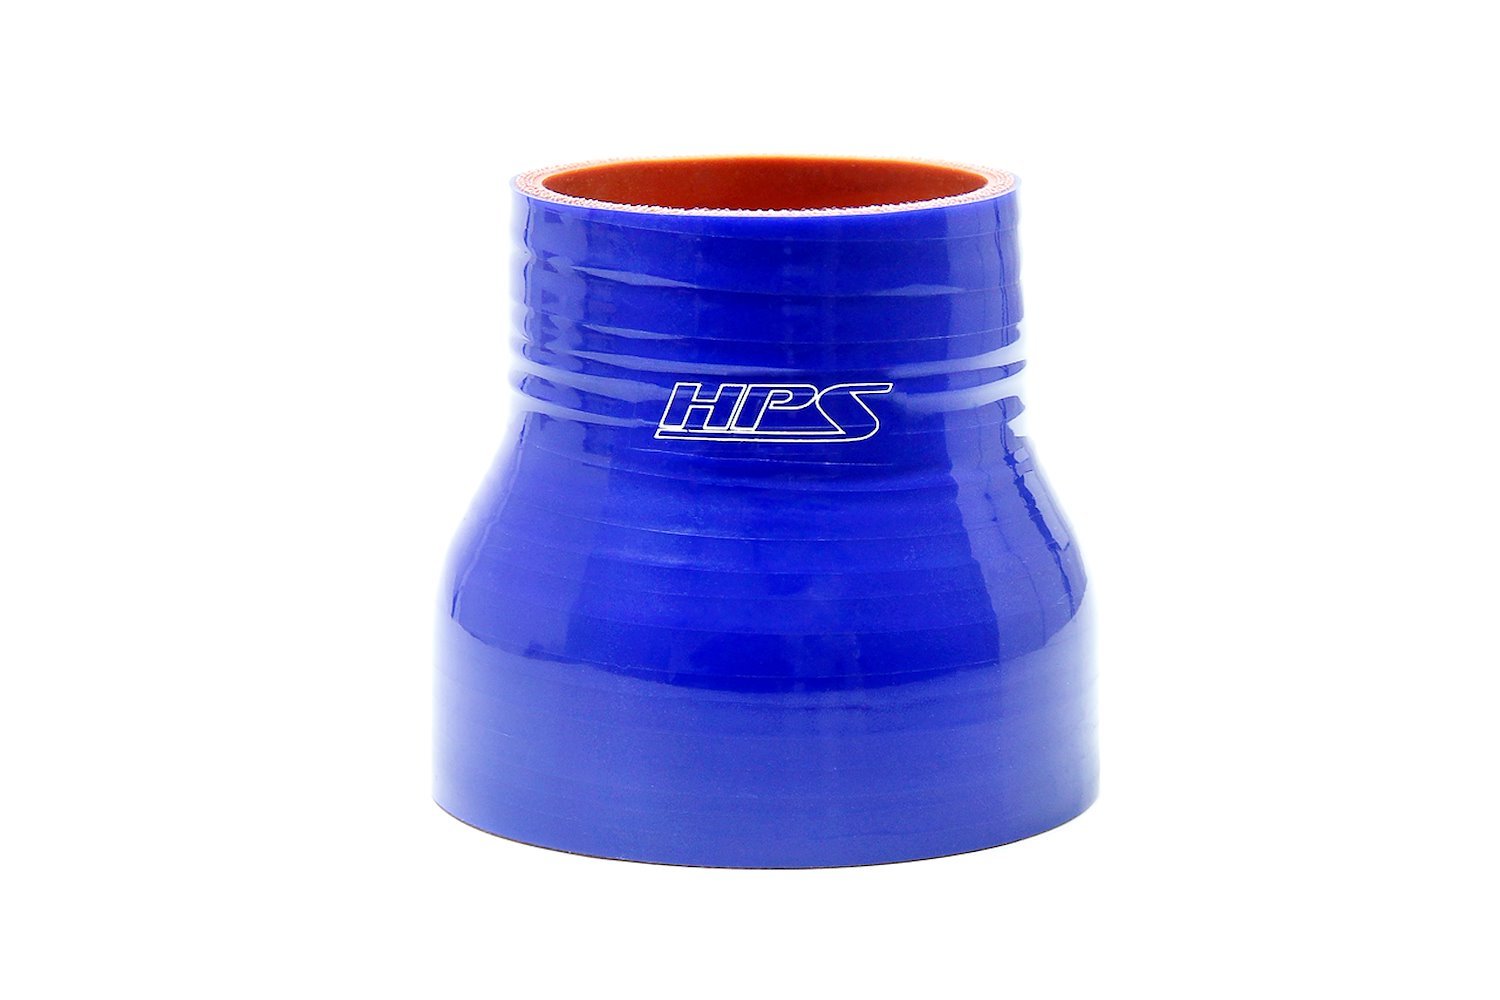 HTSR-187-238-BLUE Silicone Reducer Hose, High-Temp 4-Ply Reinforced, 1-7/8 in. - 2-3/8 in. ID, 3 in. Long, Blue